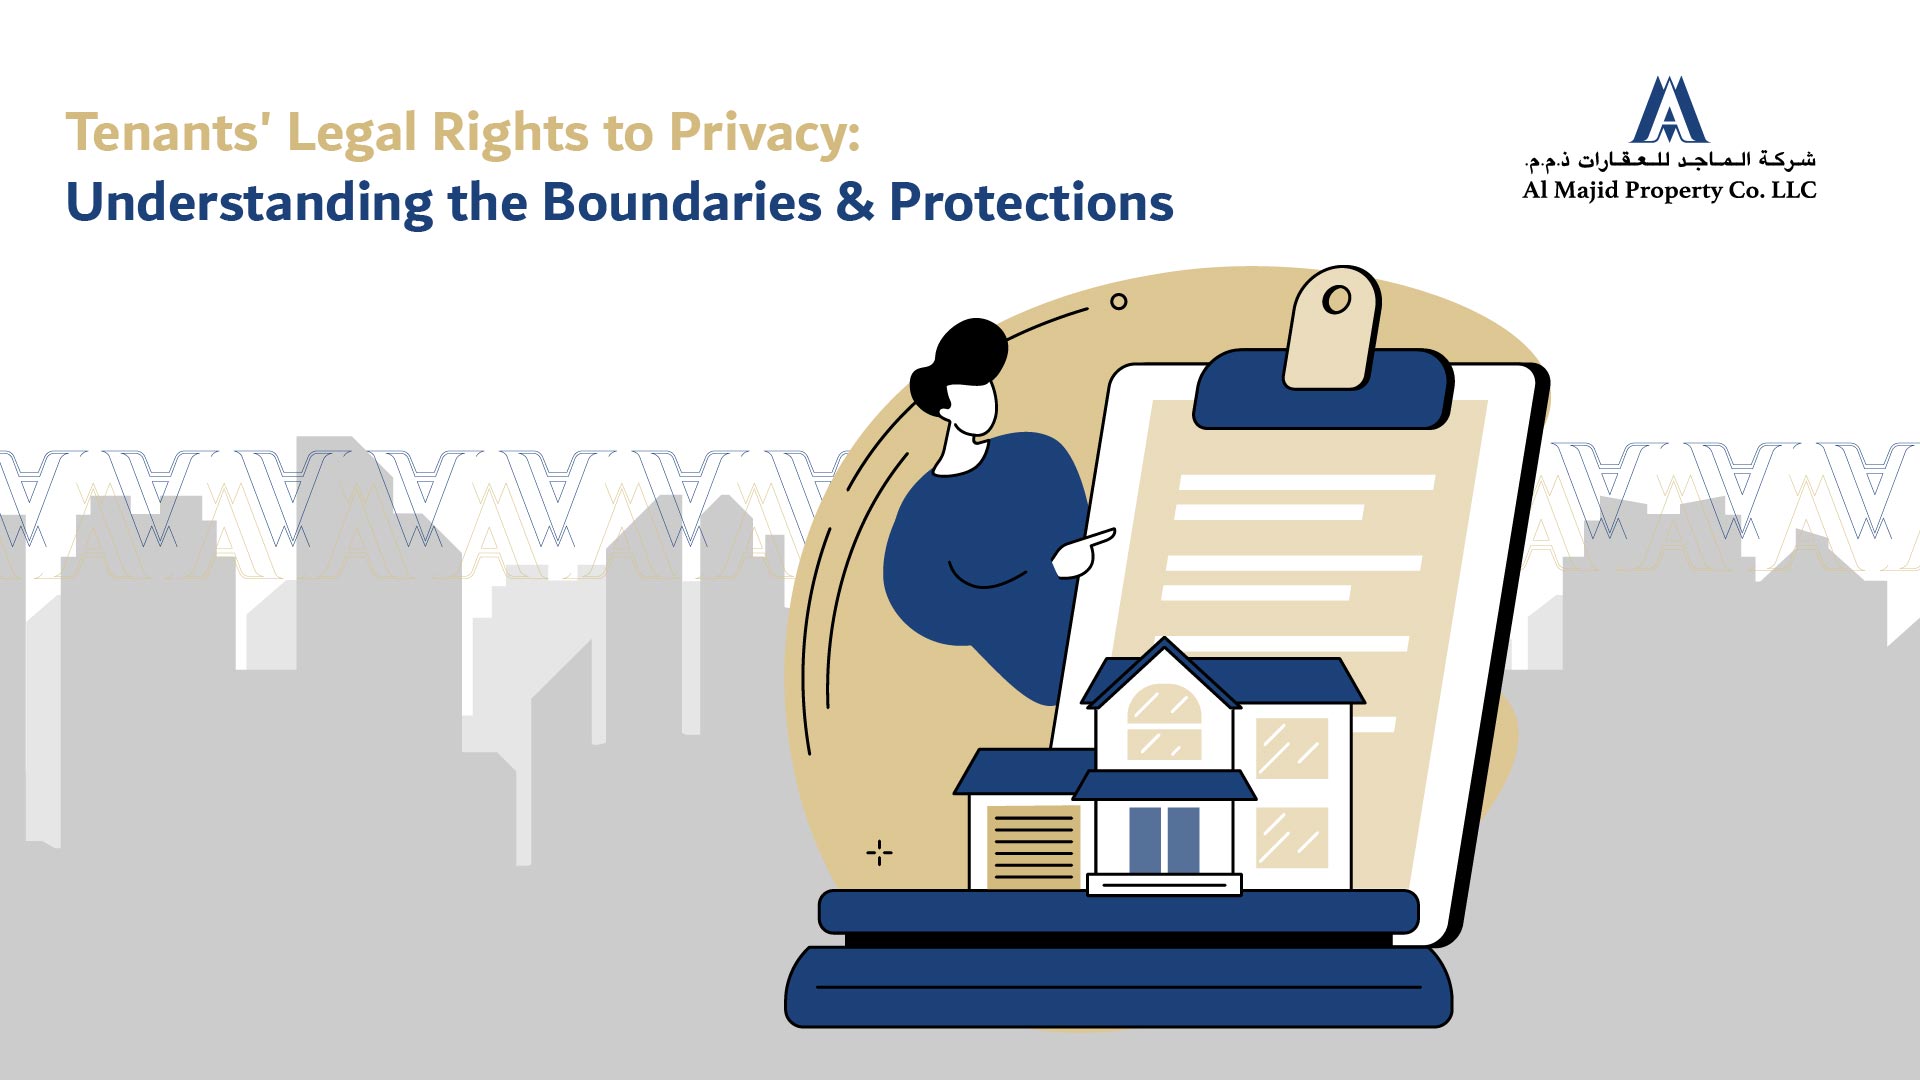 Tenants' Legal Rights to Privacy